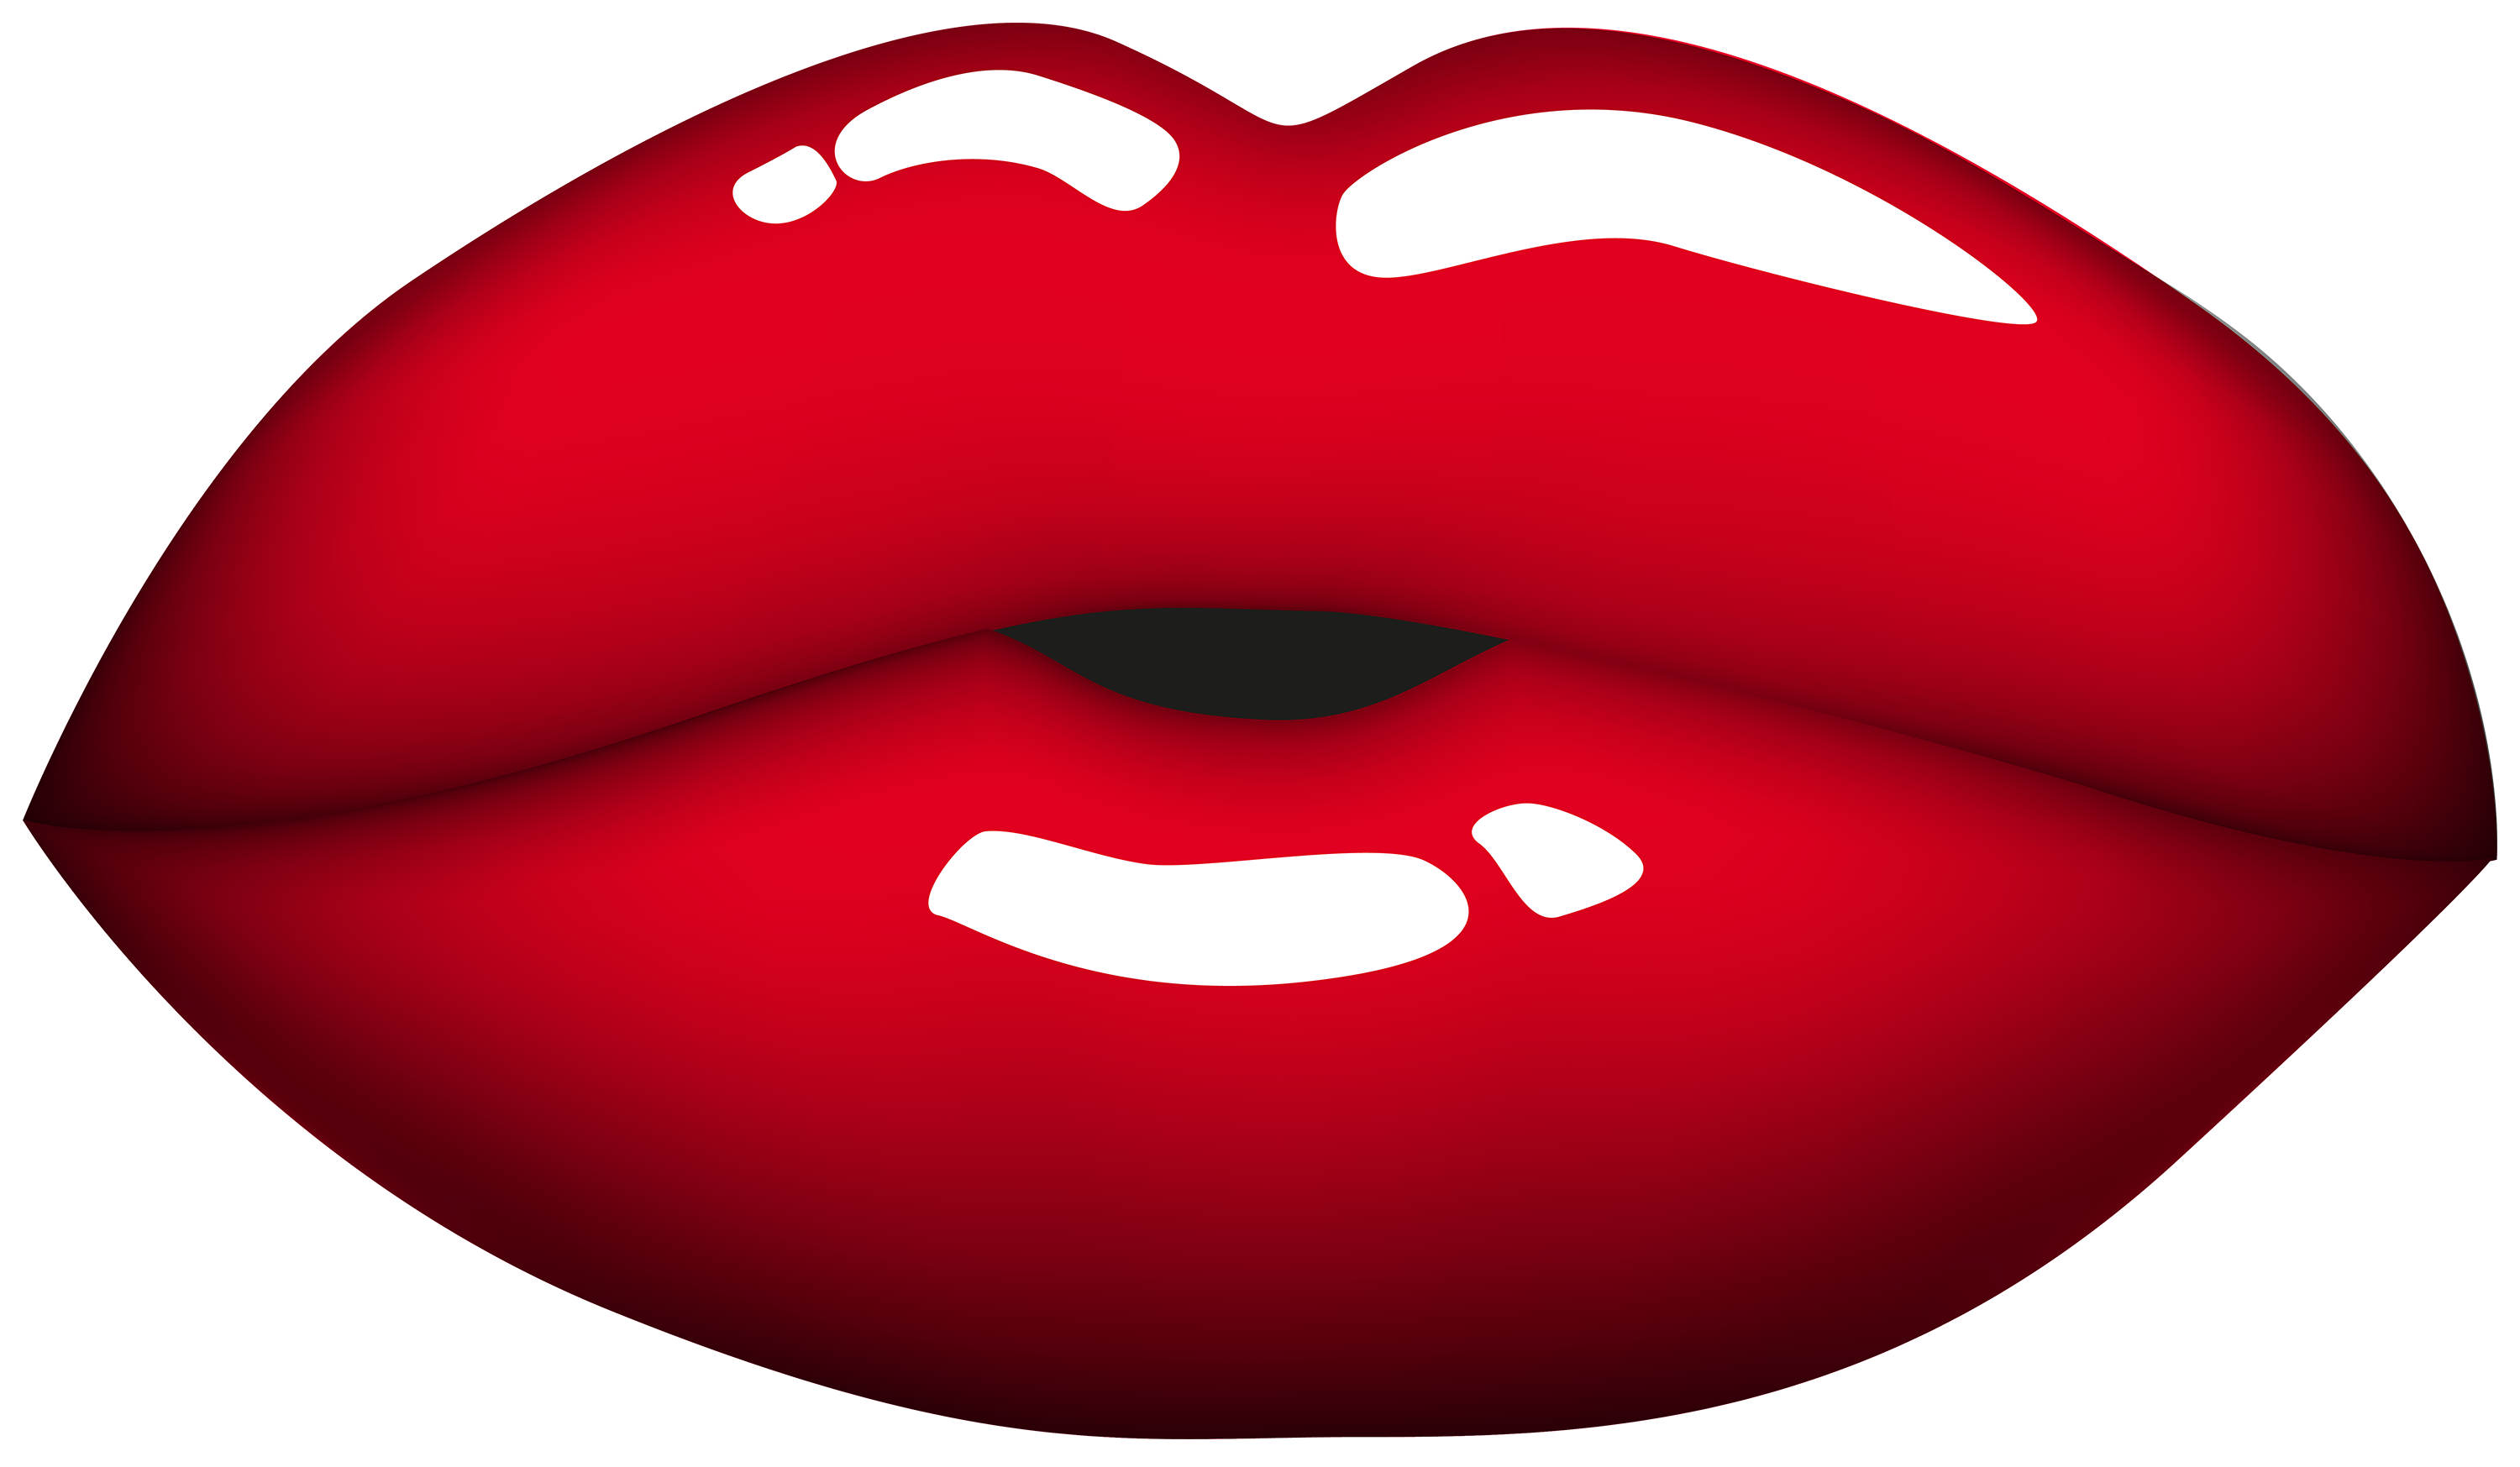 clipart of lips - photo #45